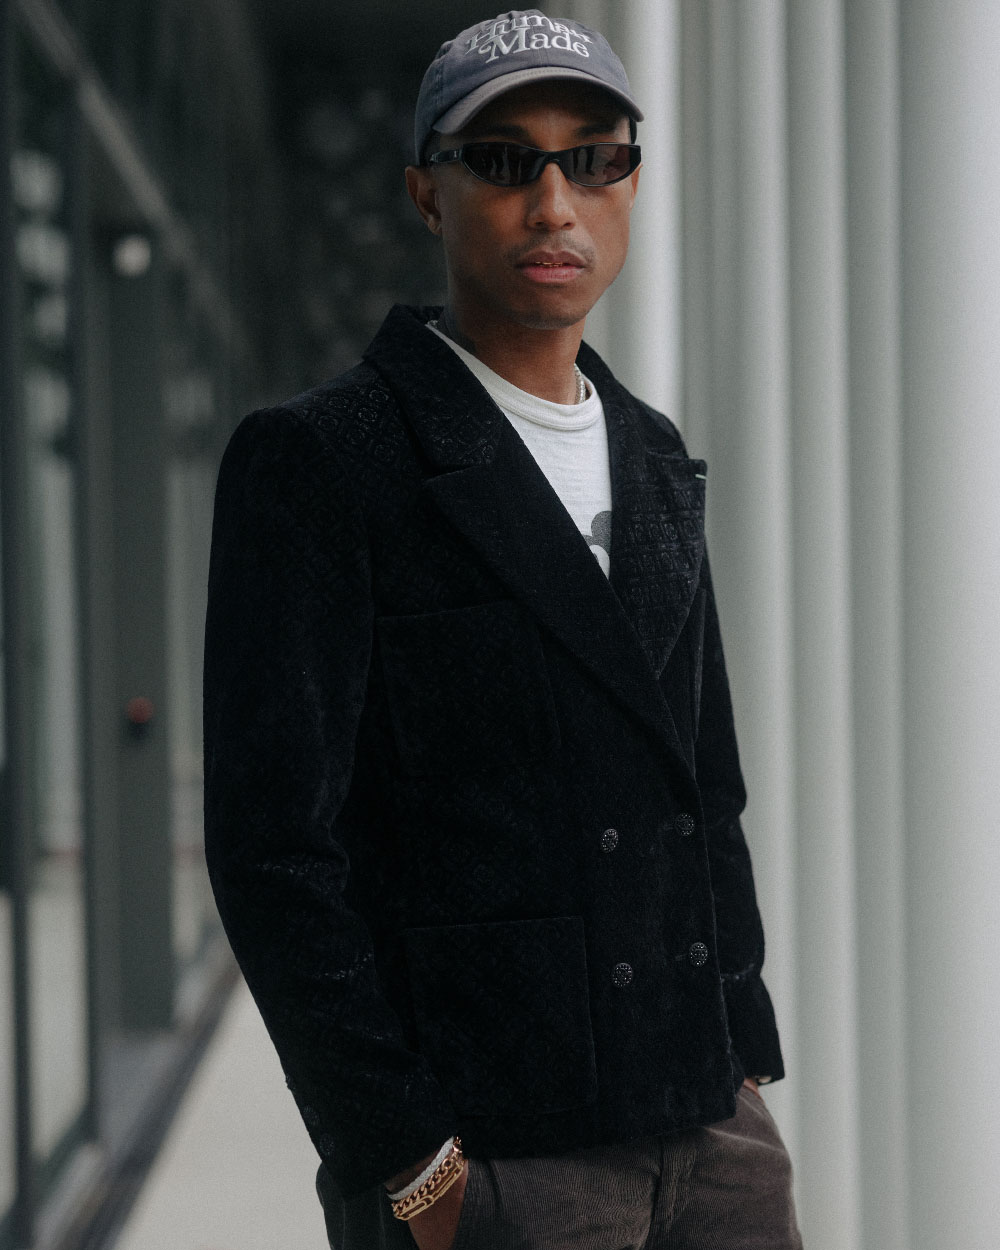 Chanel Ambassador Pharrell Williams wore Chanel at the Métiers d'art 2021/22 photo by Virgile Guinard